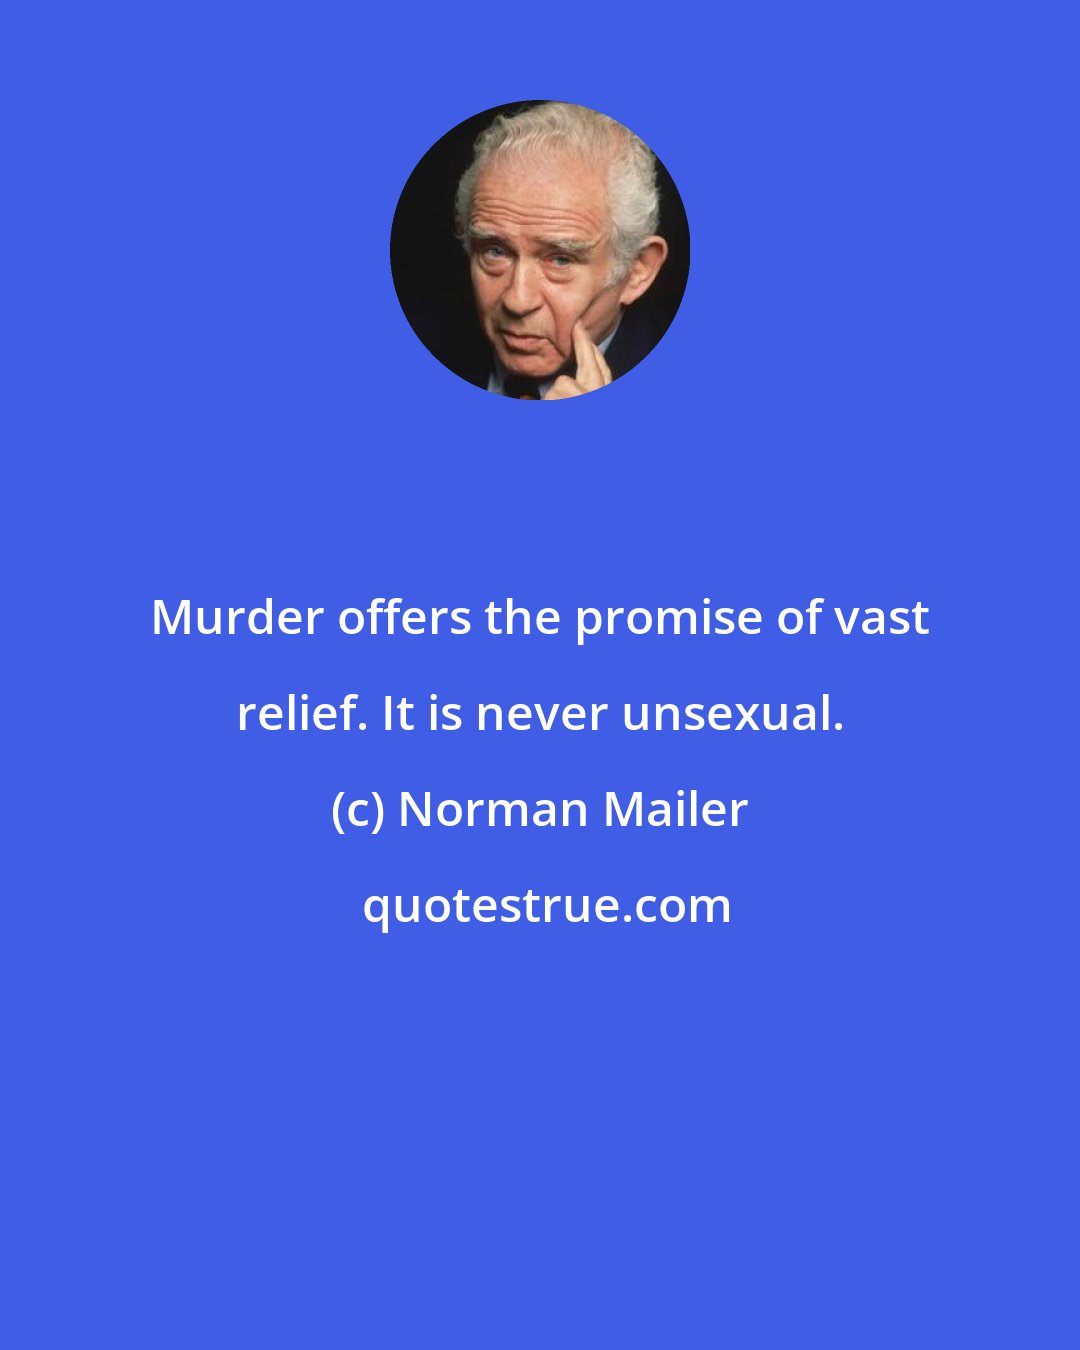 Norman Mailer: Murder offers the promise of vast relief. It is never unsexual.